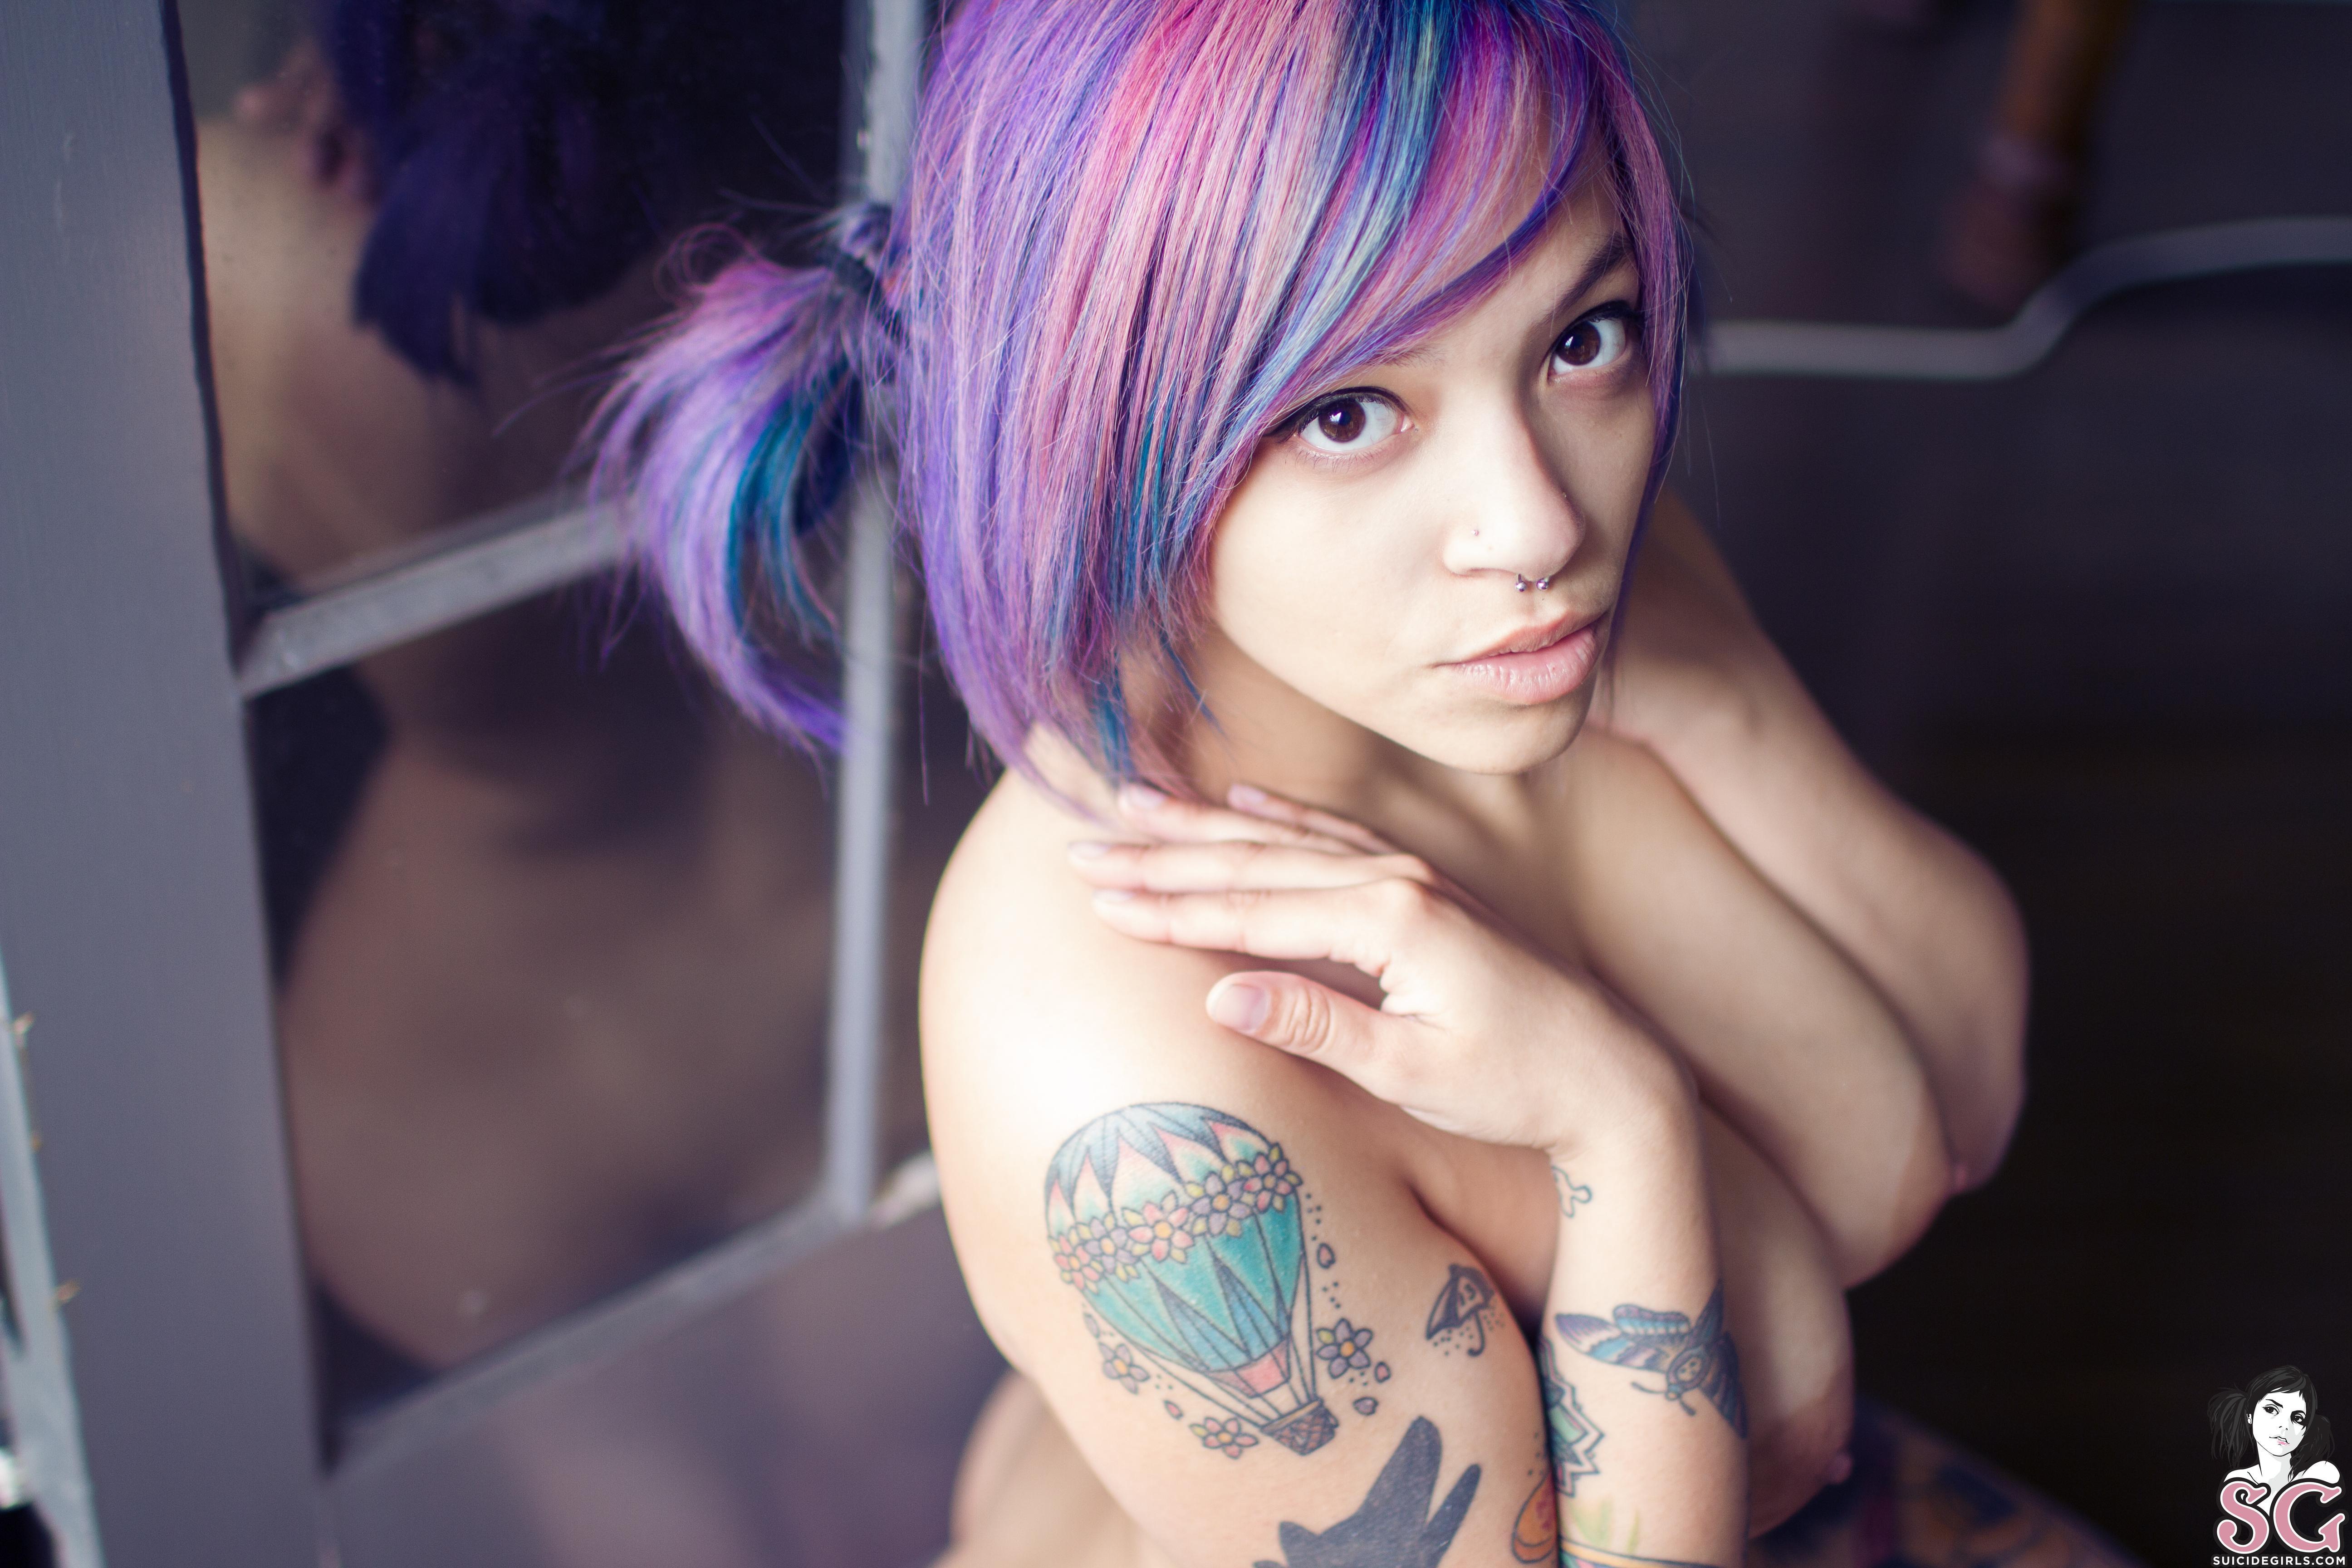 Beautiful Sexy Suicide Girl Lua Love By Daylight 45 High resolution image.